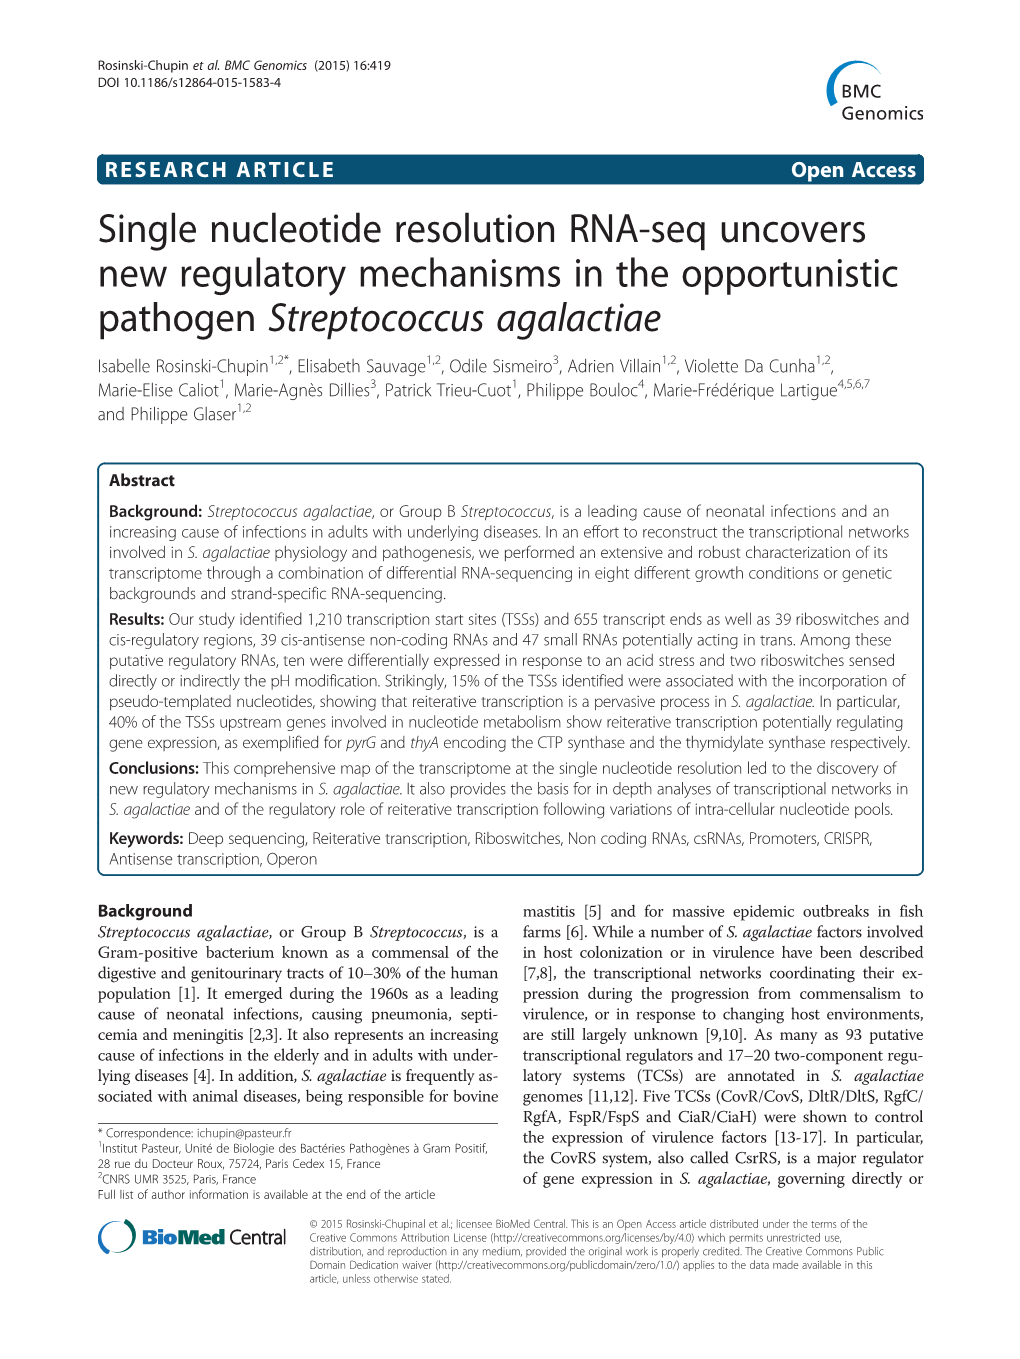 Single Nucleotide Resolution RNA-Seq Uncovers New Regulatory Mechanisms in the Opportunistic Pathogen Streptococcus Agalactiae